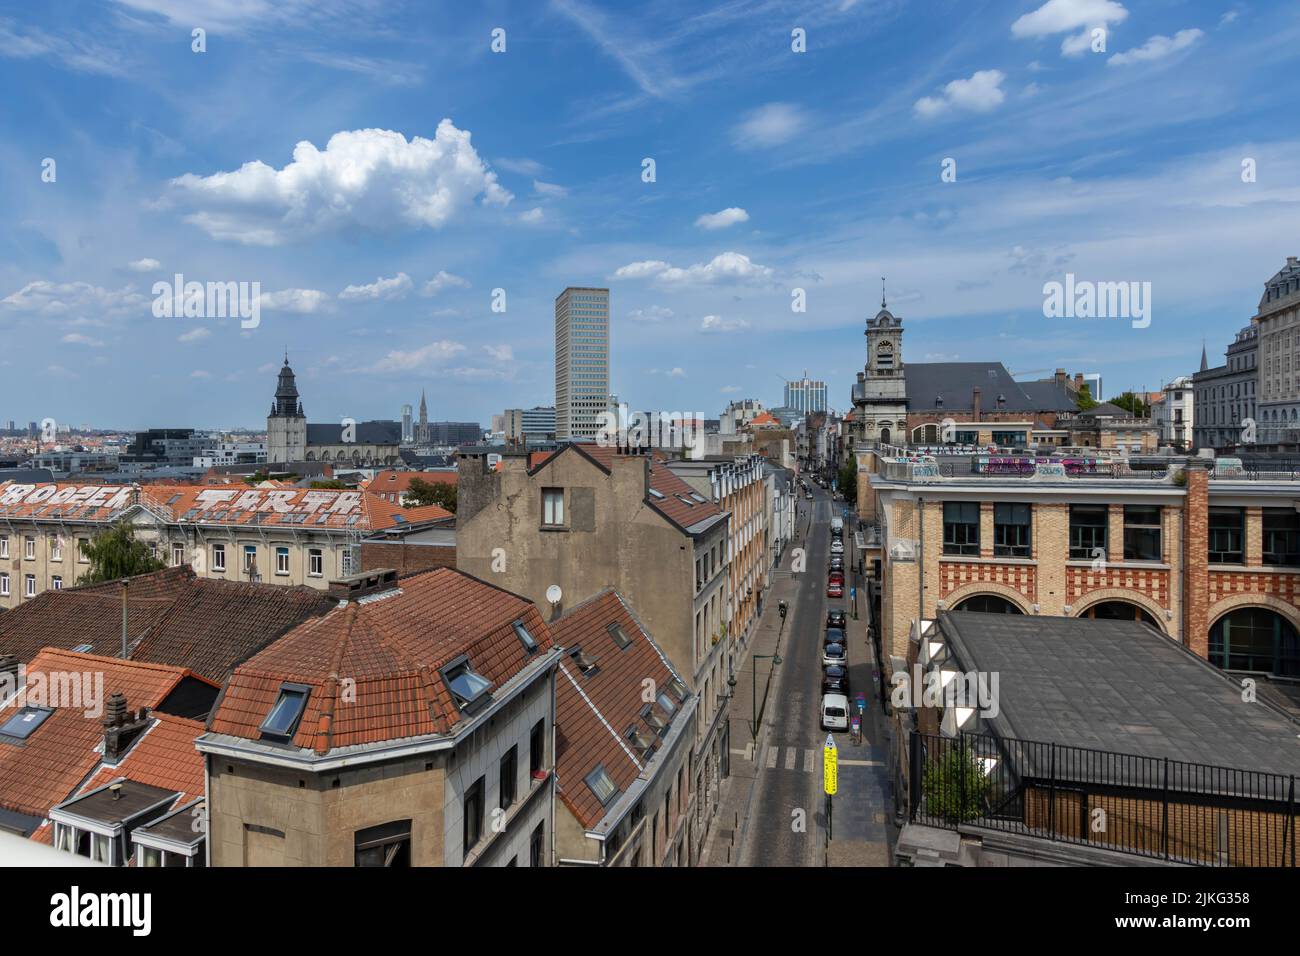 Brussels, Belgium - July 16, 2018: Rue des Minimes as viewed from L'Ascenseur Stock Photo